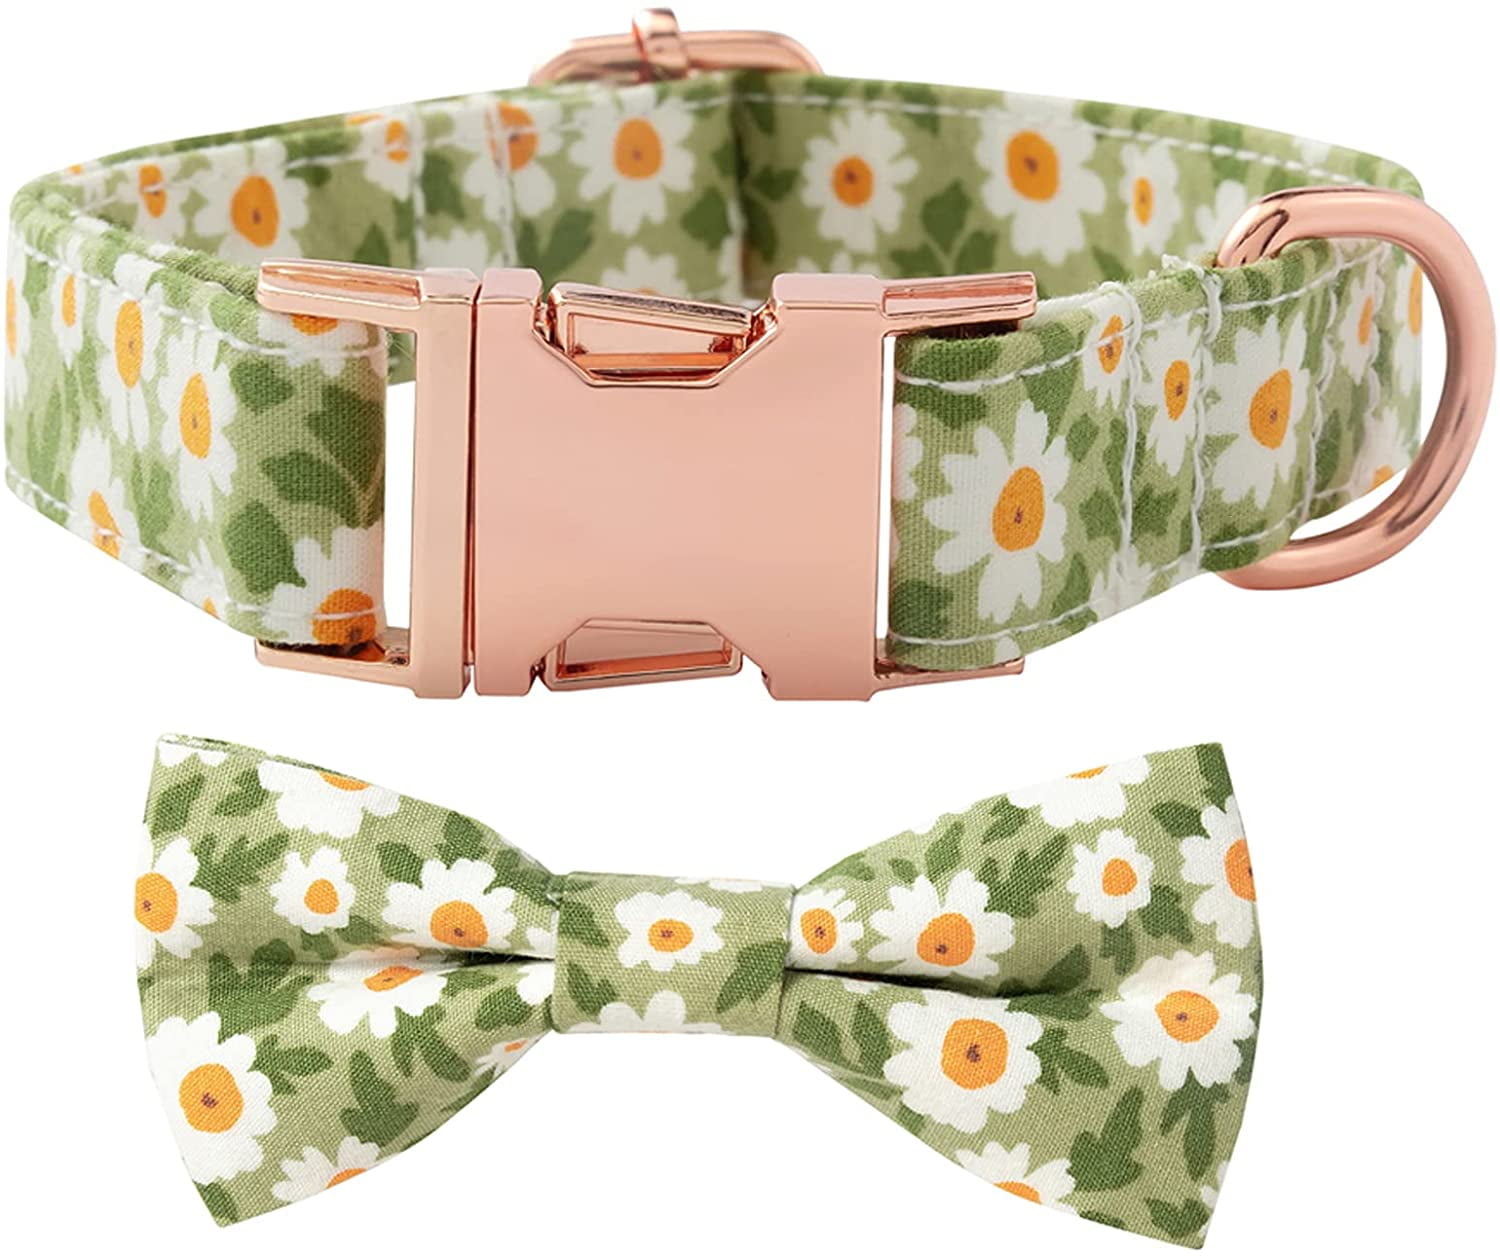 Bowtie Dog Collar Female, Bow Tie Floral Girl Dogs Collars, Adjustable Soft  For Small Medium Large Cats, Cute Daisy Patterns Comfortable Cotton Collars  With Metal Buckle, Durable Pet Puppy Gift Pink 